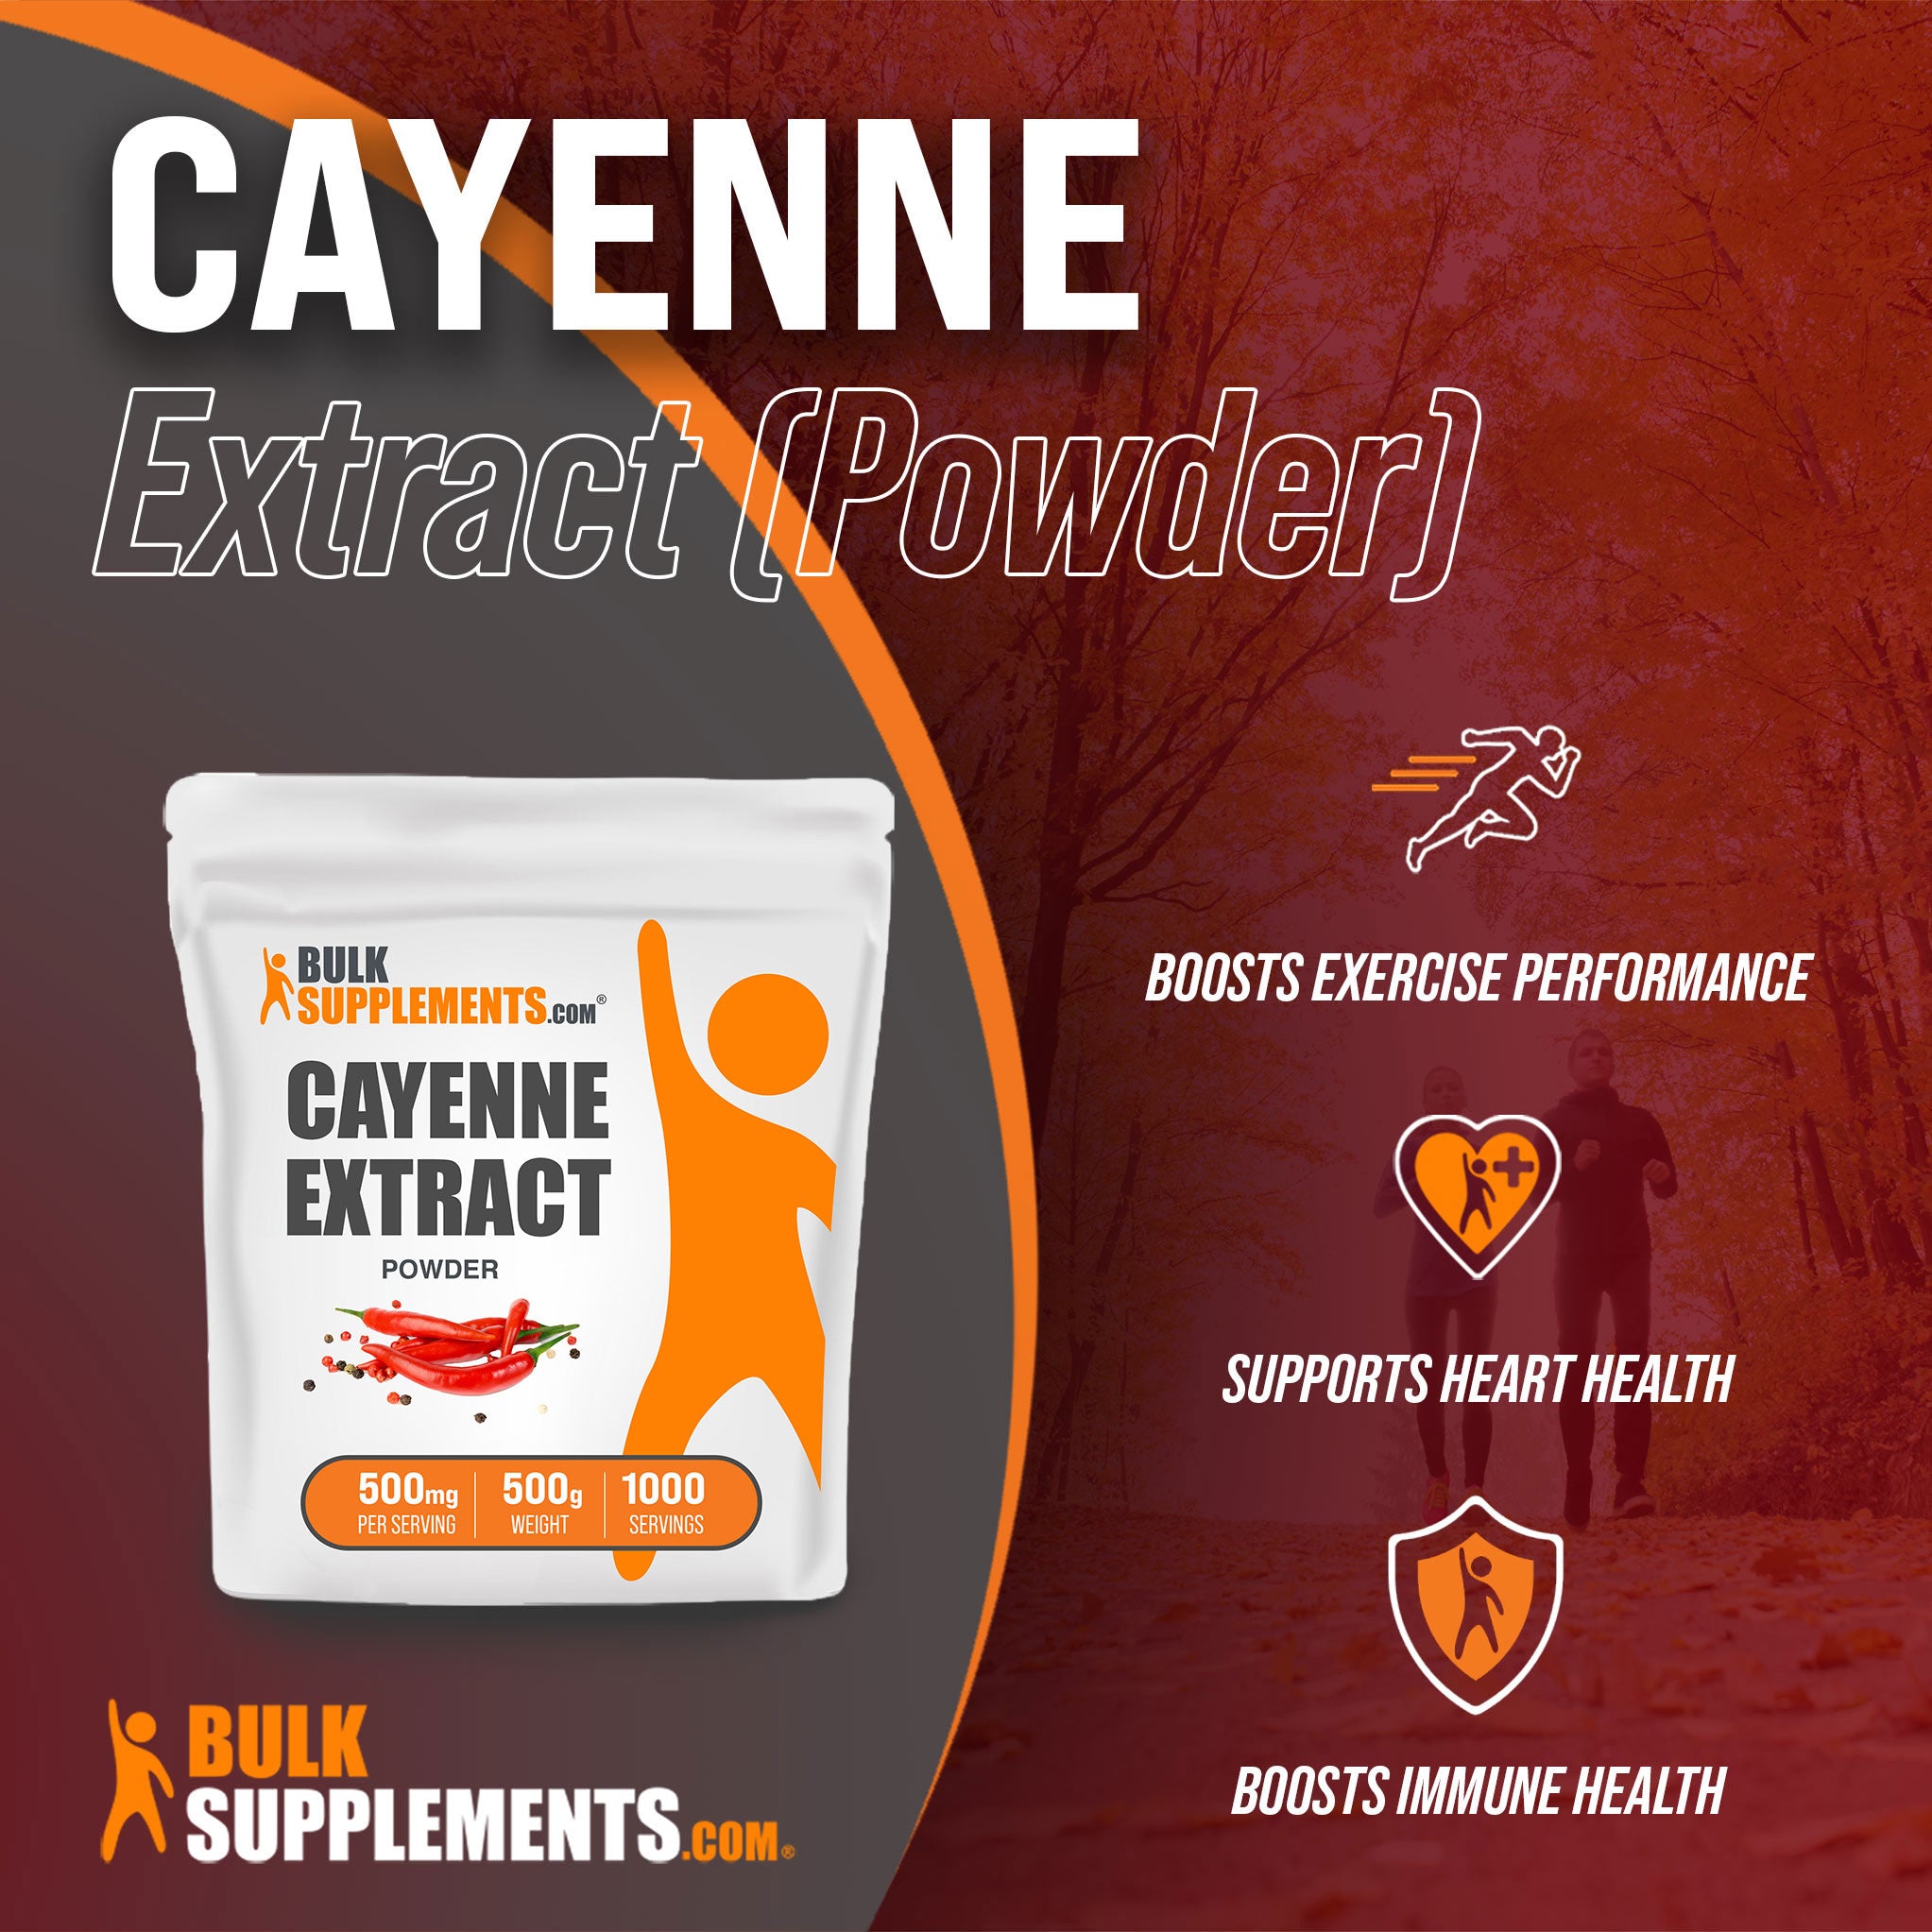 Benefits of Cayenne Extract Powder; boosts exercise performance, supports heart health, boosts immune health